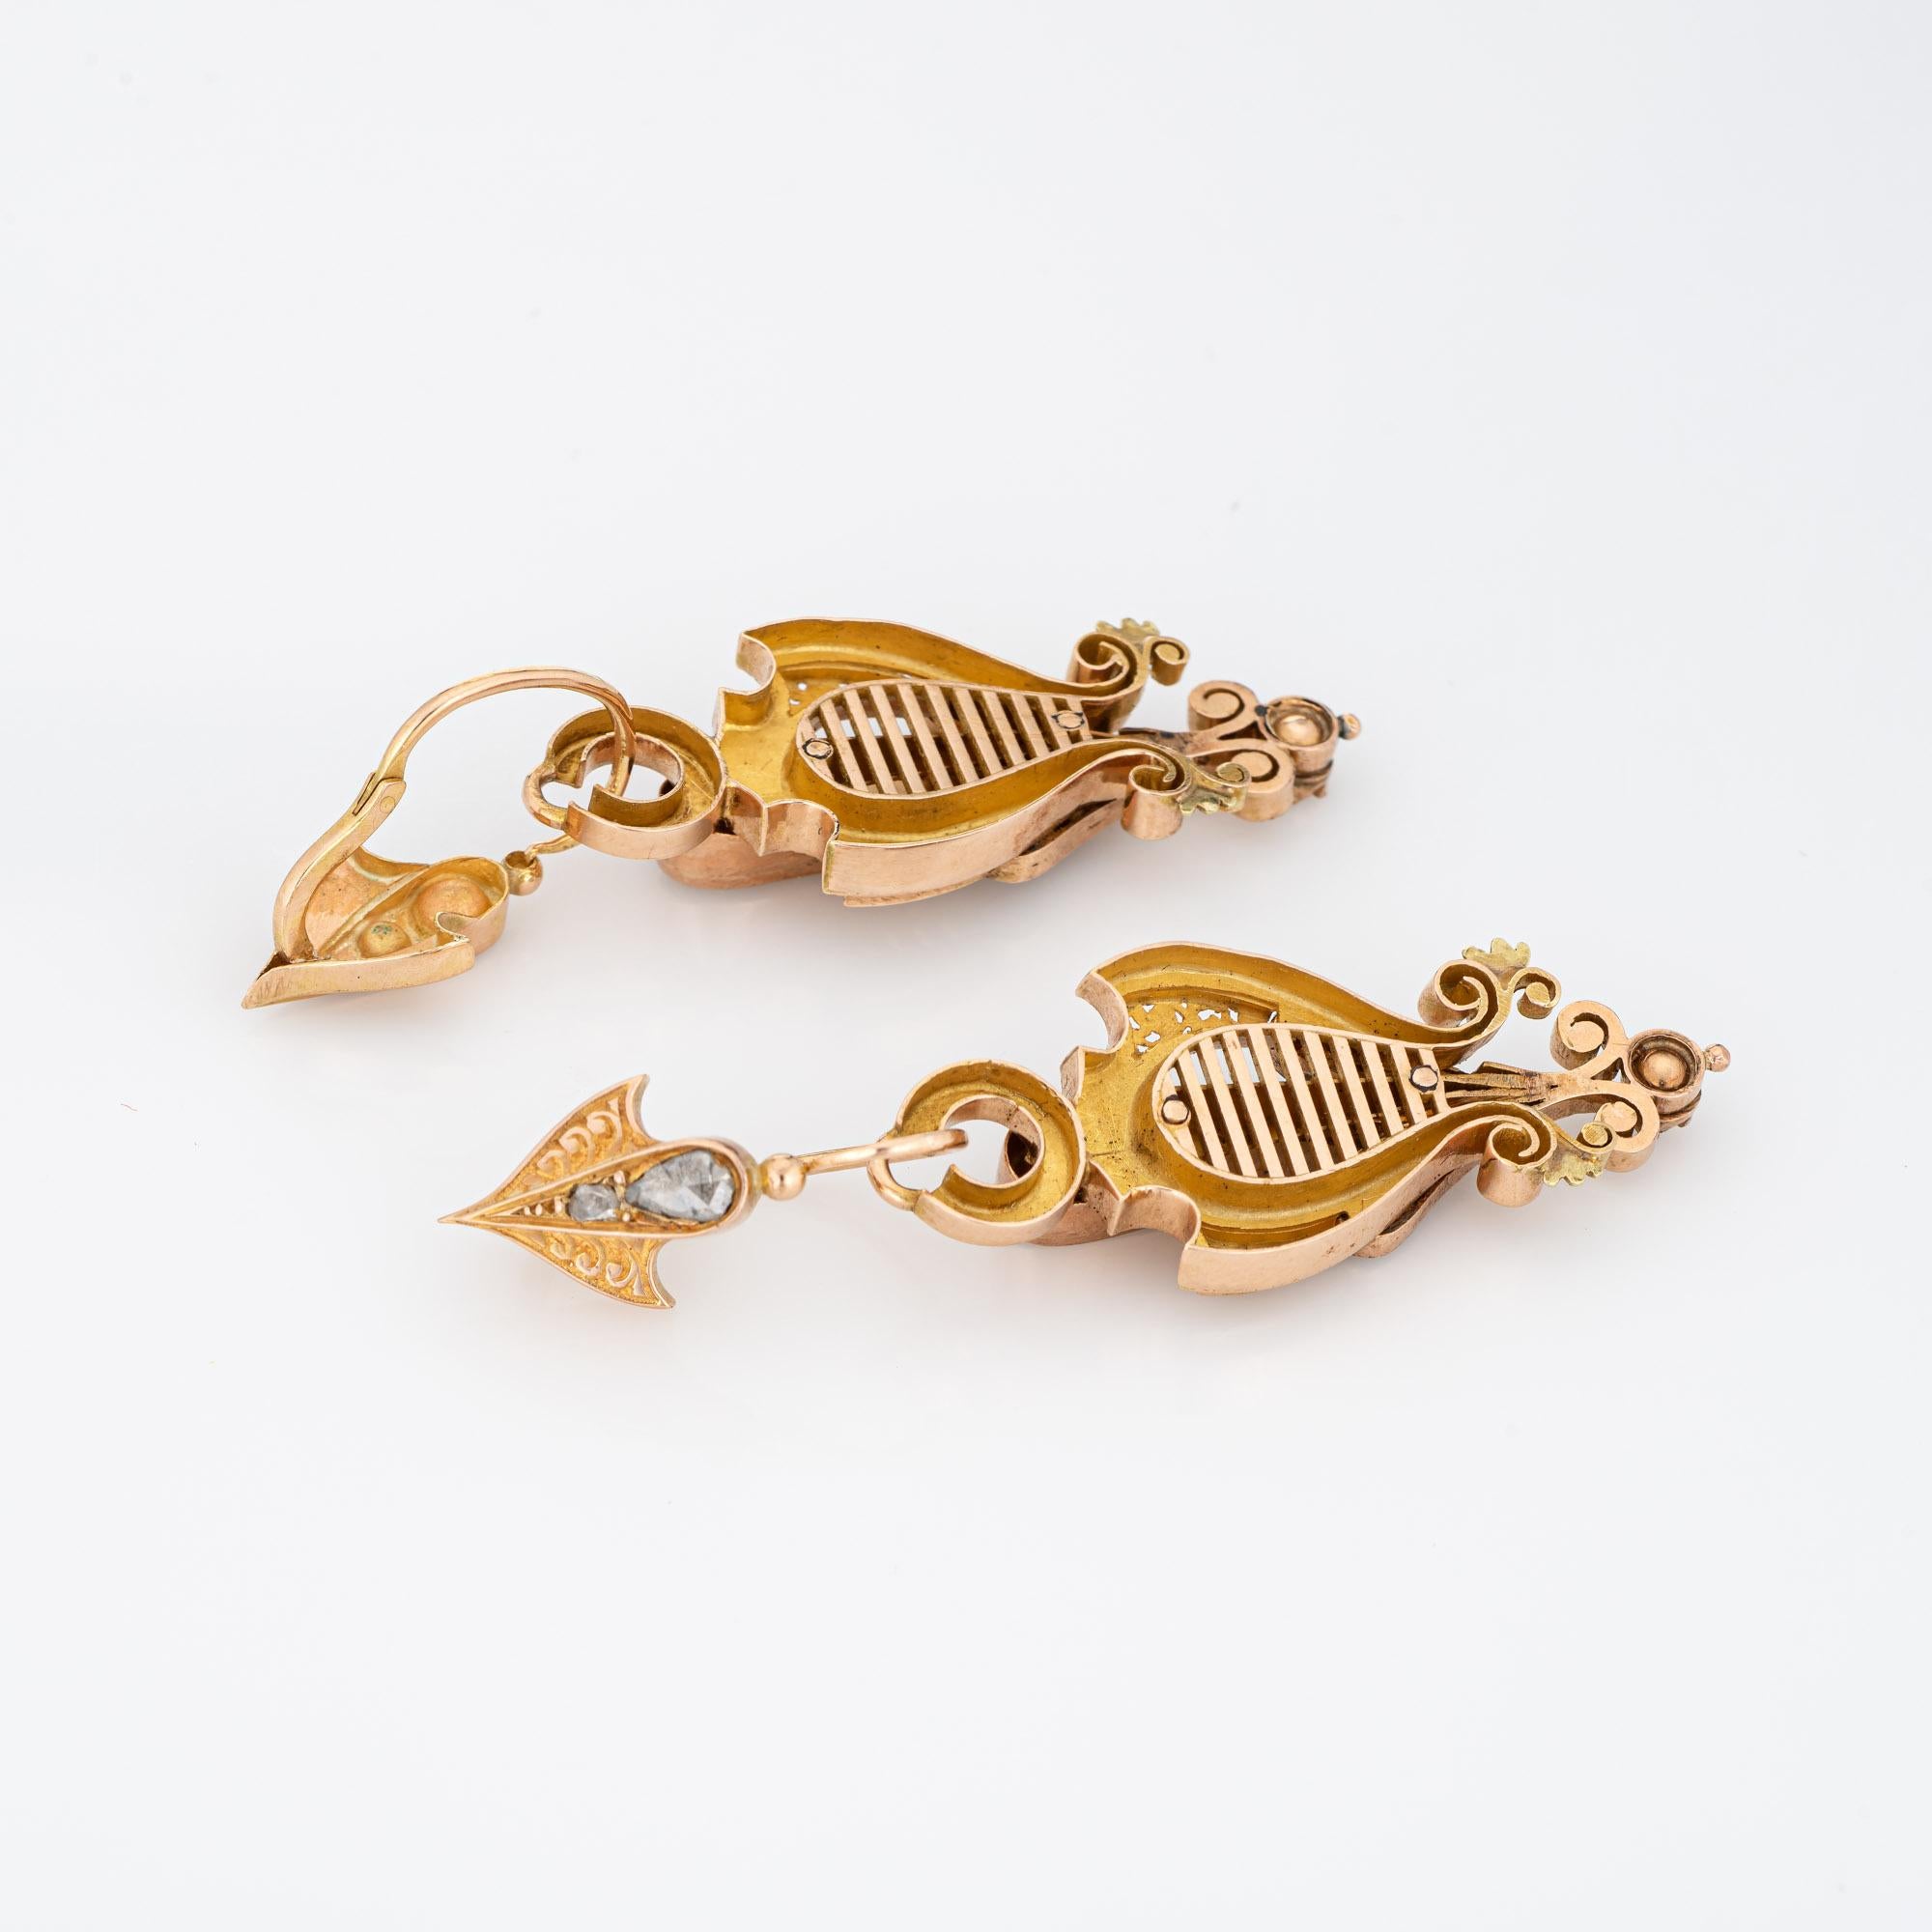 Elegant pair of antique Victorian earrings (circa 1860s to 1870s) crafted in 14k yellow gold. 

Old rose cut diamond range in size from 0.01 to 0.30 carats and total an estimated 2 carats (estimated at L-M color and I2-3 clarity).
The charming day &